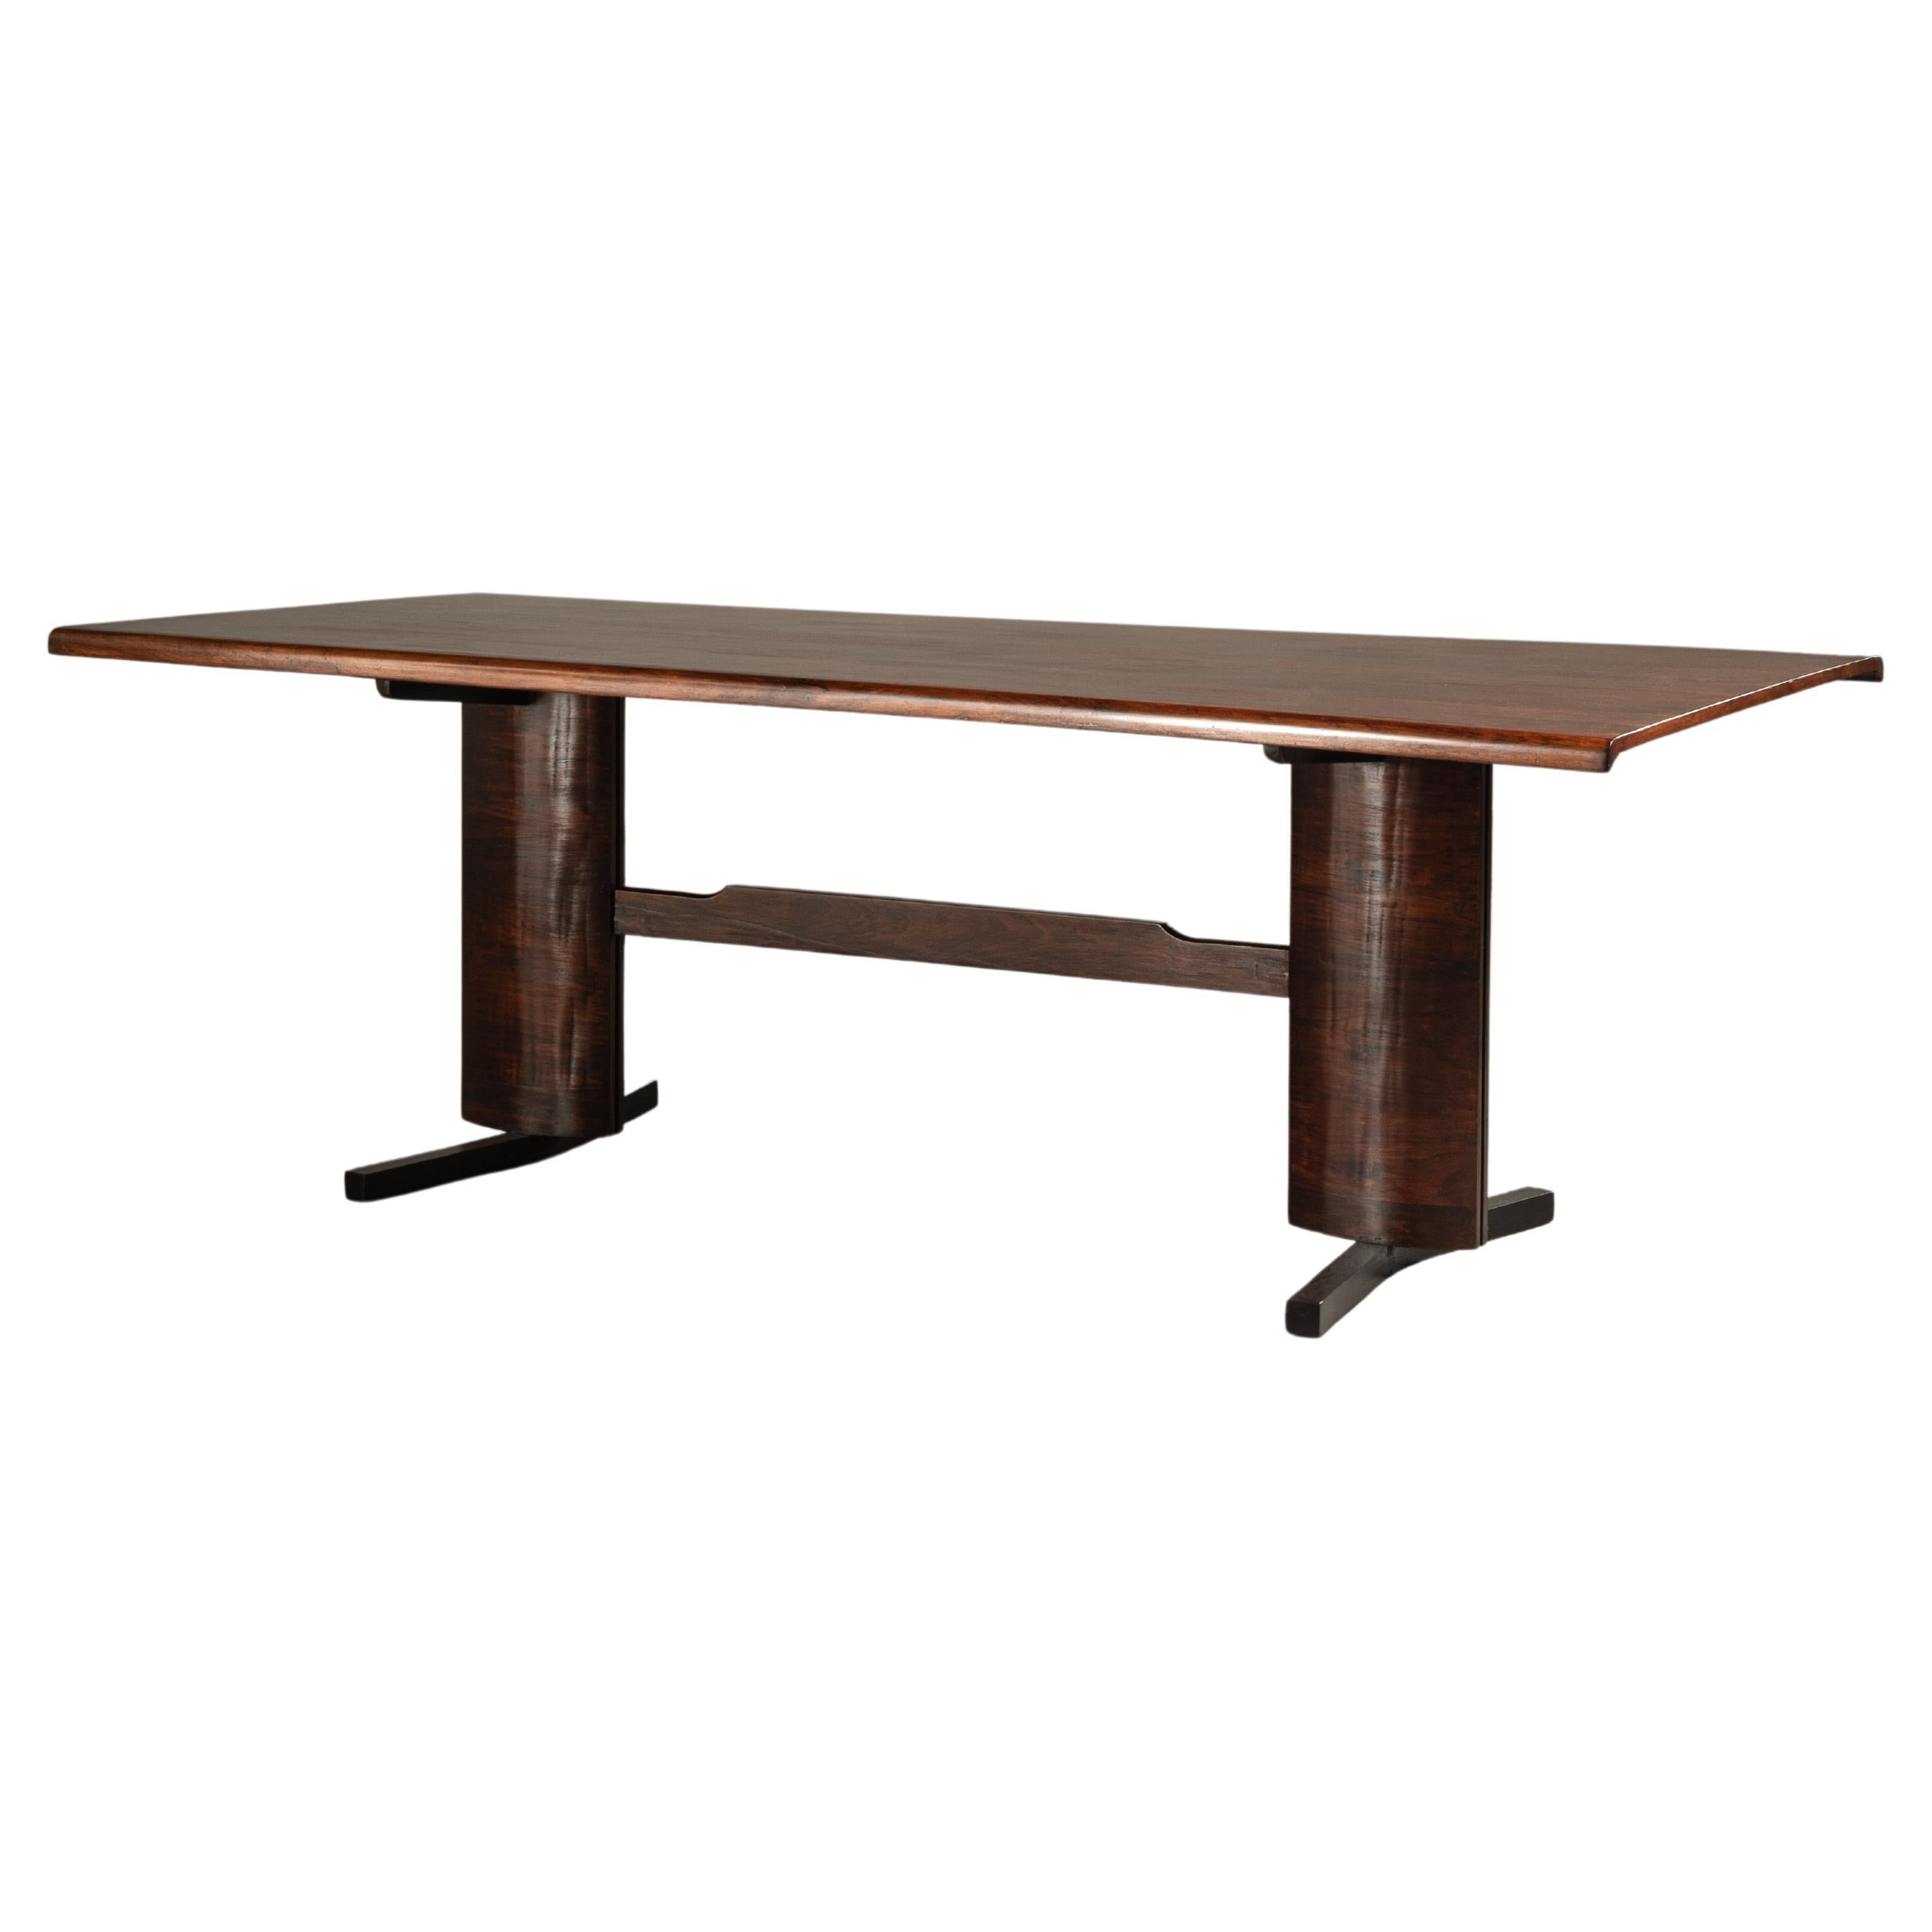 Dining Table in Hardwood, by Novo Rumo, Brazilian Mid-Century Modern For Sale